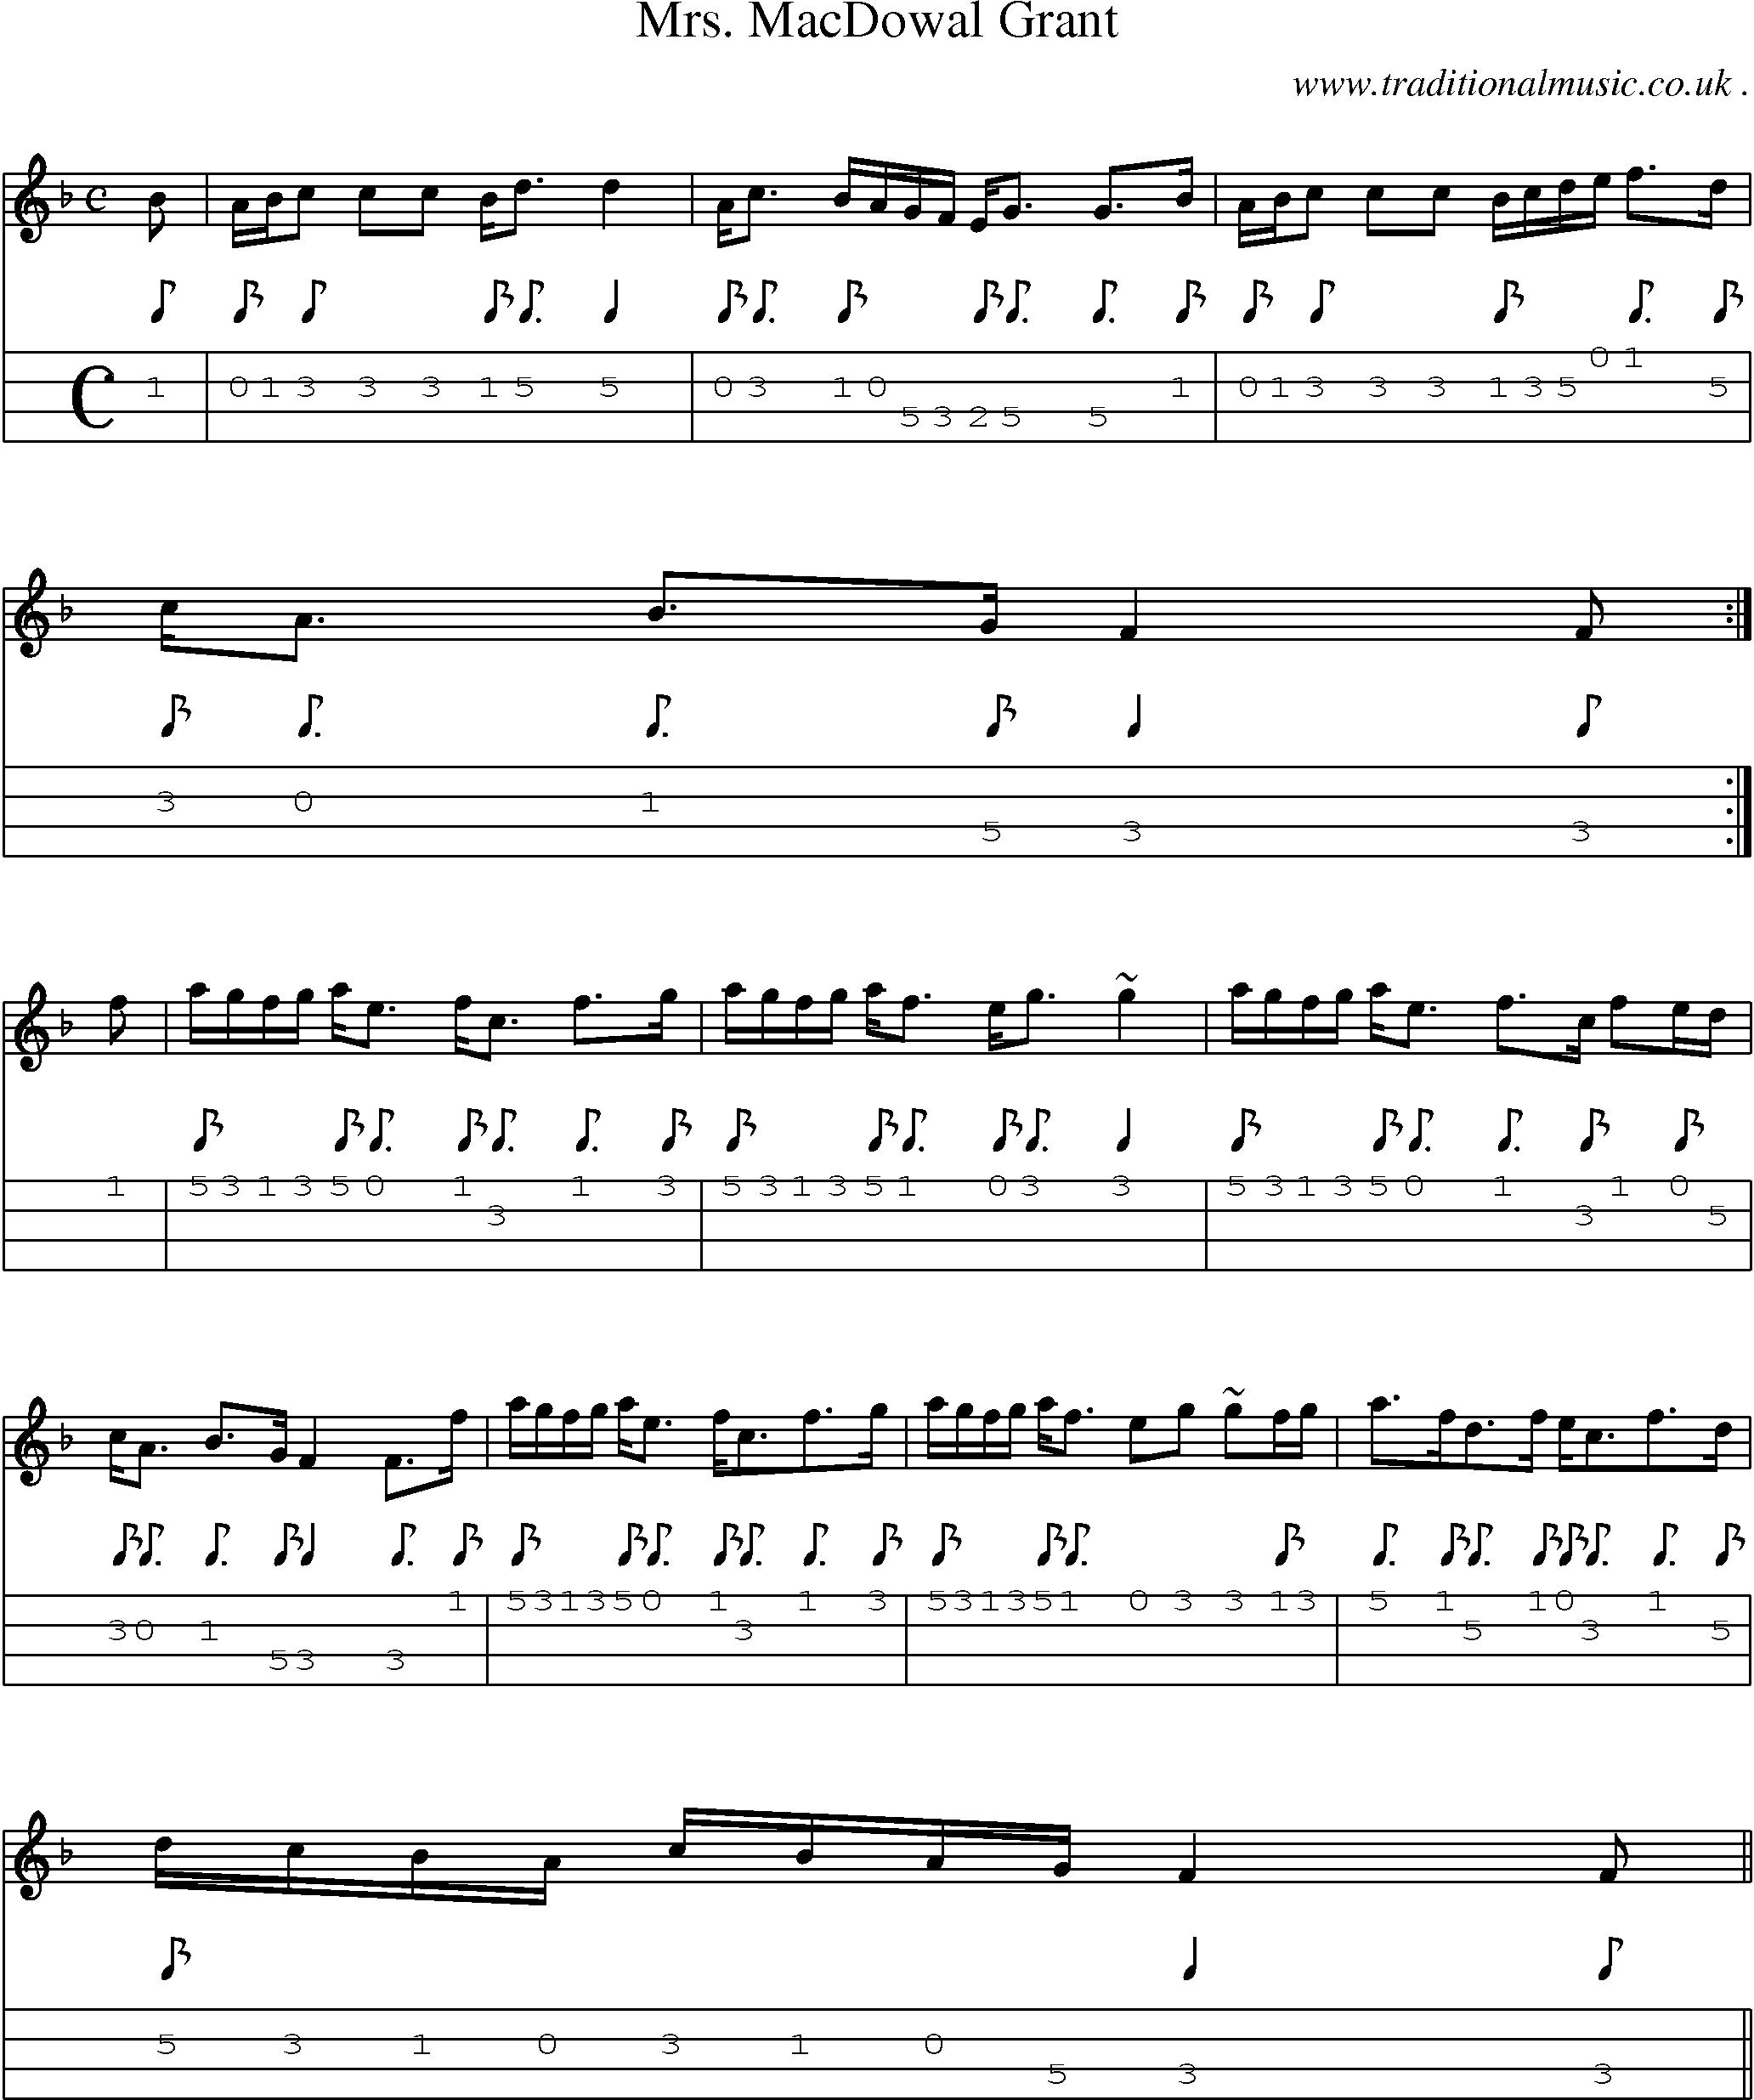 Sheet-music  score, Chords and Mandolin Tabs for Mrs Macdowal Grant